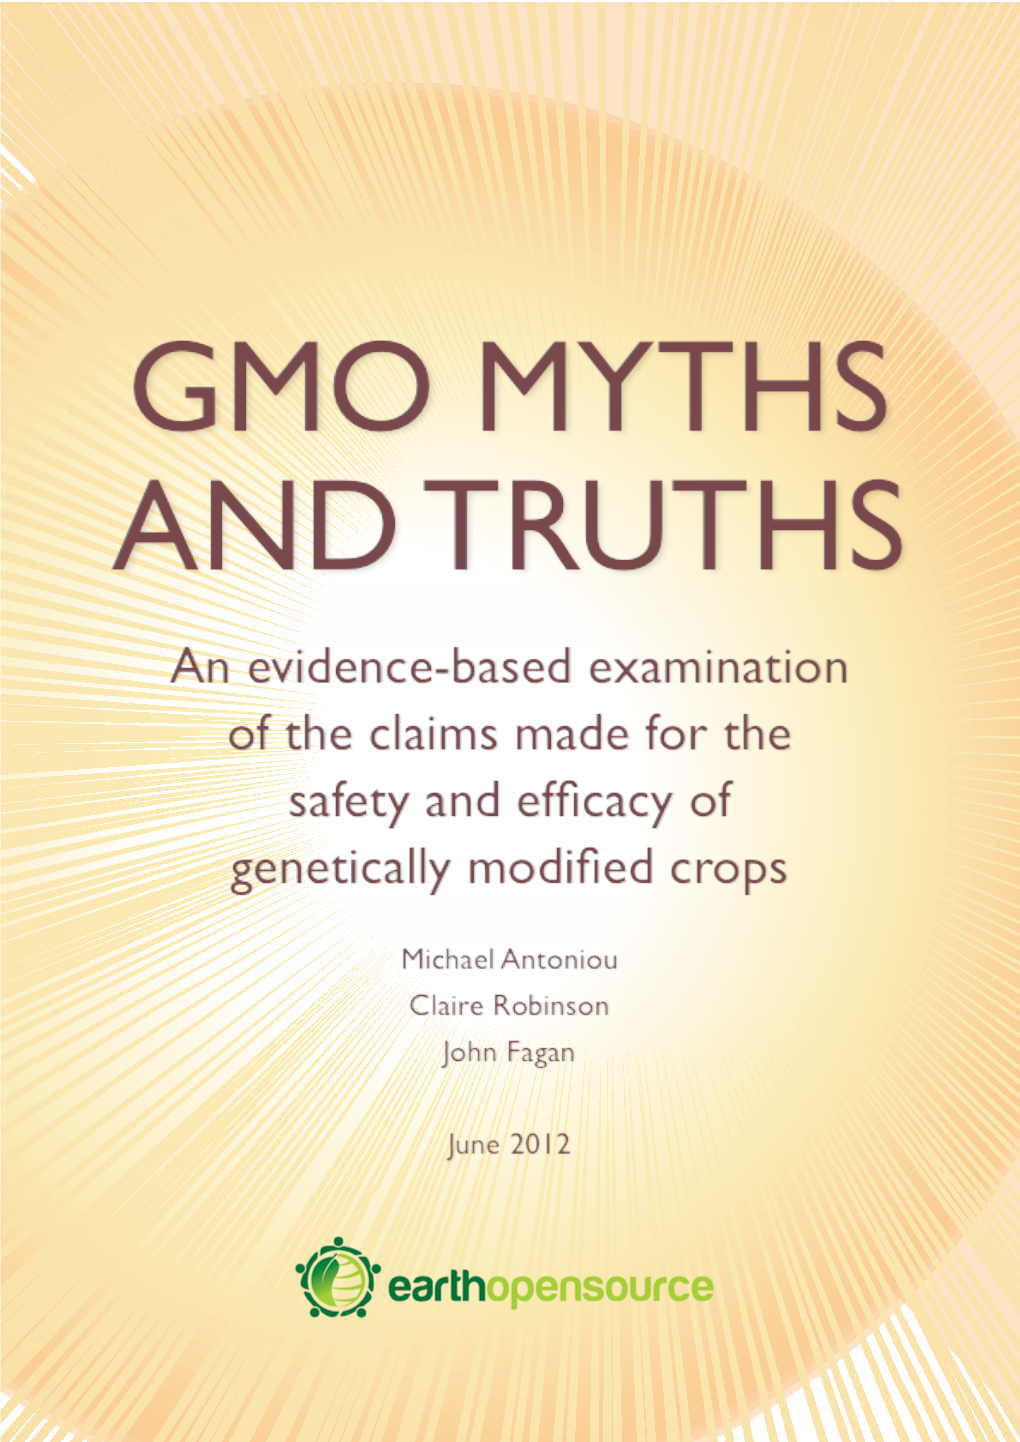 An Evidence-Based Examination of the Claims Made for the Safety and Efficacy of Genetically Modified Crops